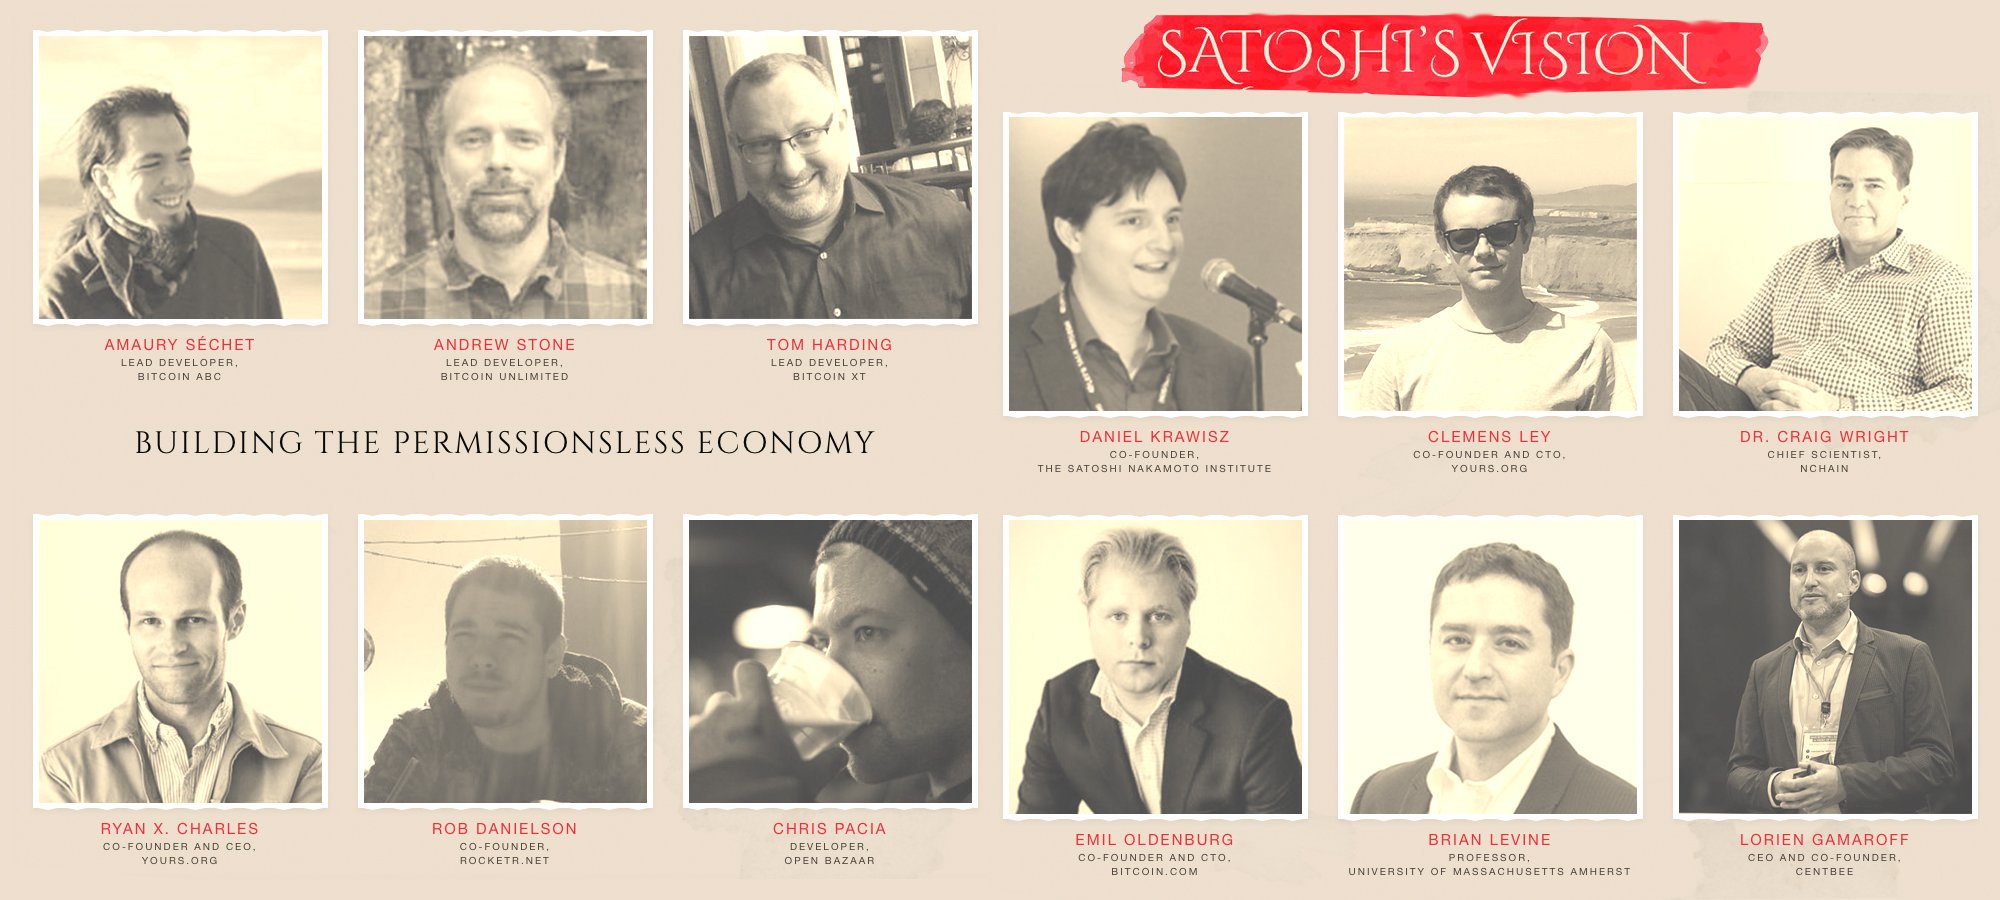 The 2018 Satoshi's Vision Conference Heads to Japan